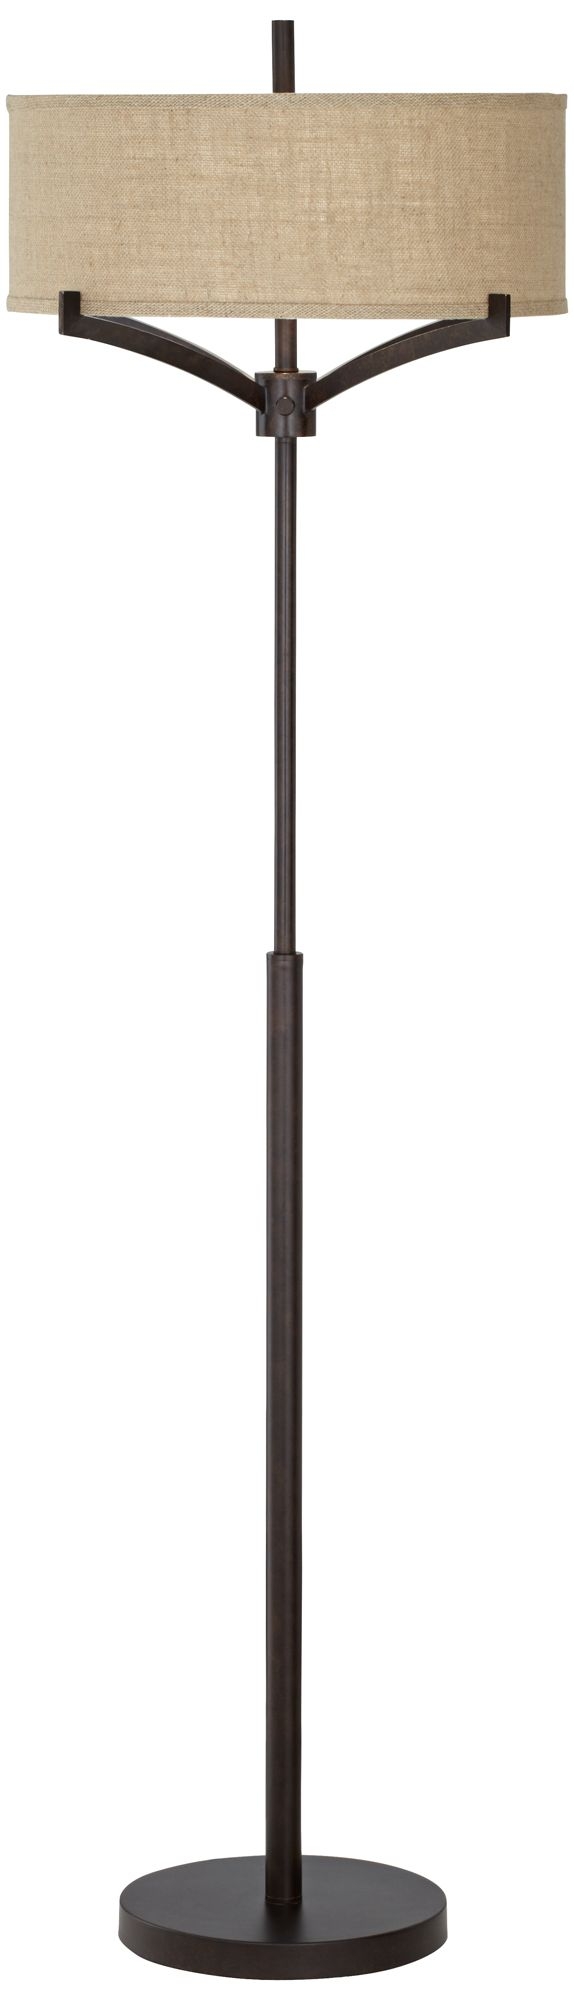 Franklin Iron Works Tremont Floor Lamp with Burlap Shade - Image 0